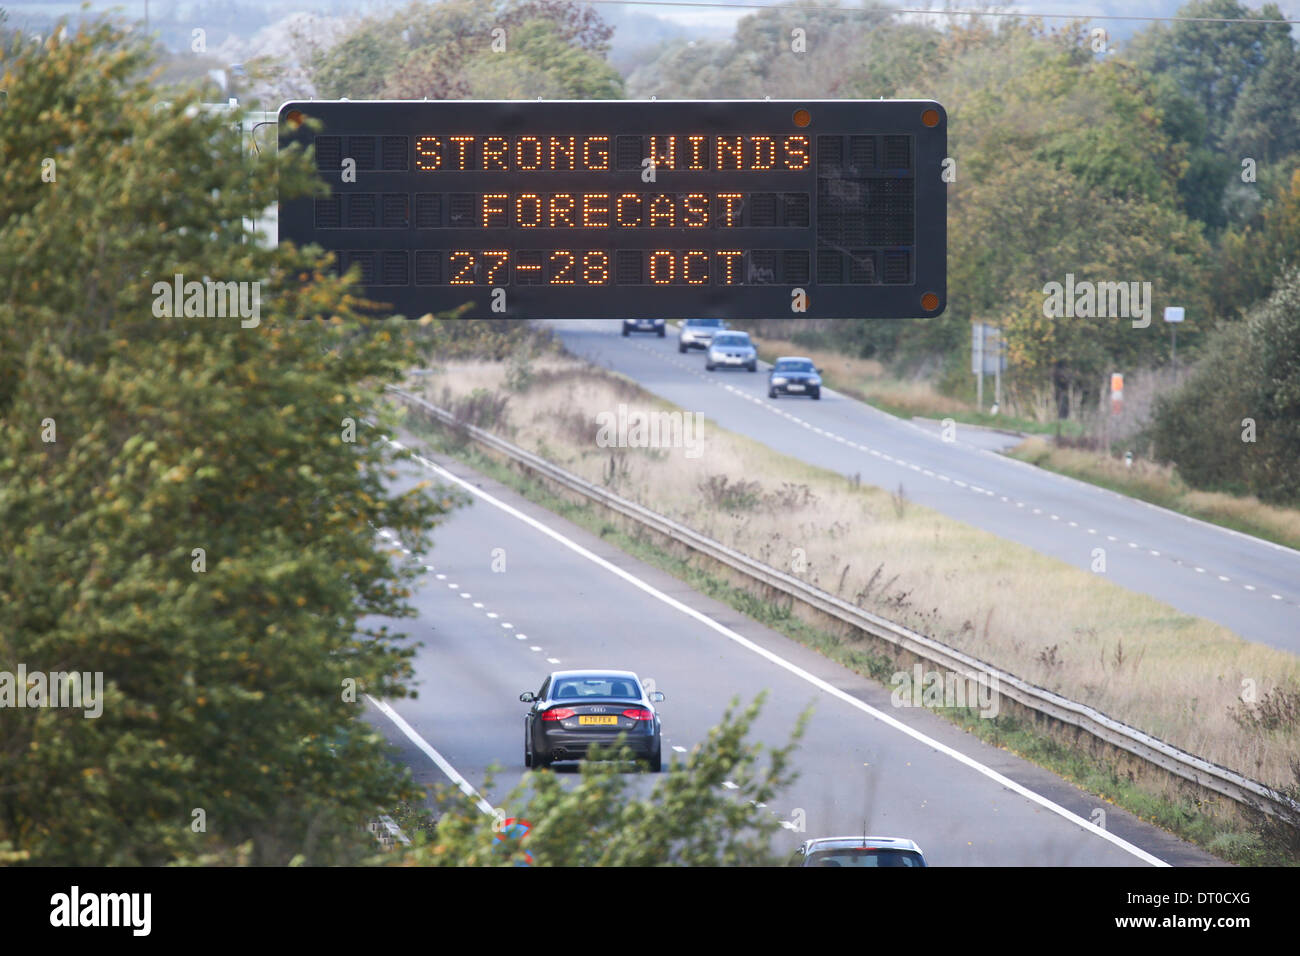 MOTORWAY WARNING SIGN GIVING INFORMATION TO DRIVERS ON THE A1(M) IN CAMBRIDGESHIRE. Stock Photo